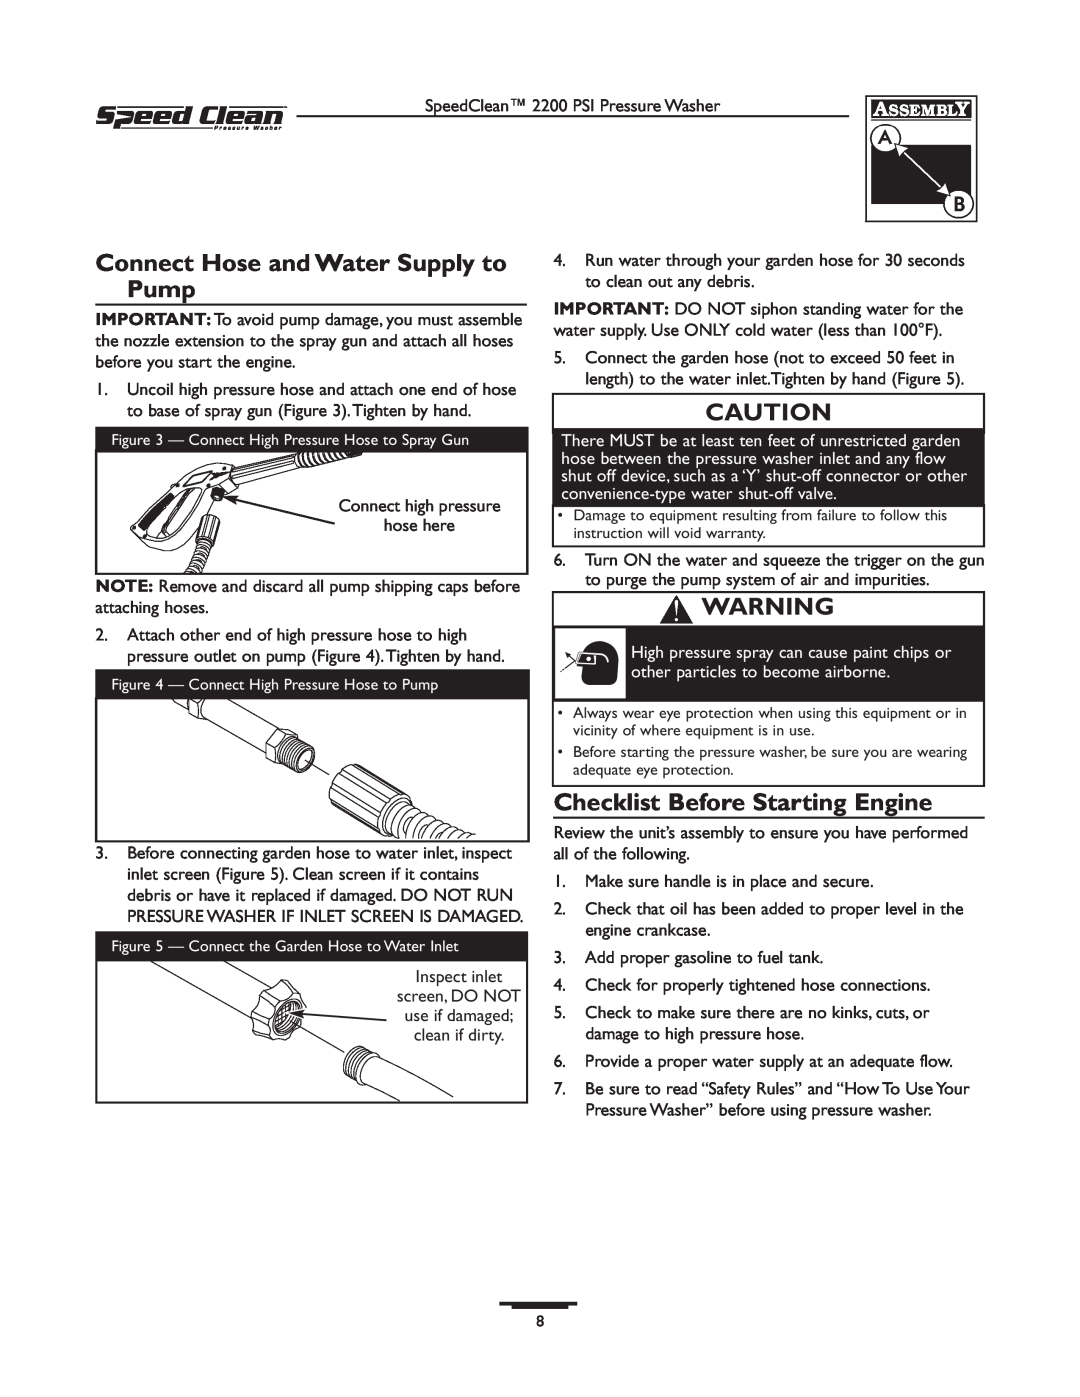 Briggs & Stratton 020239-1 owner manual Connect Hose and Water Supply to Pump, Checklist Before Starting Engine 